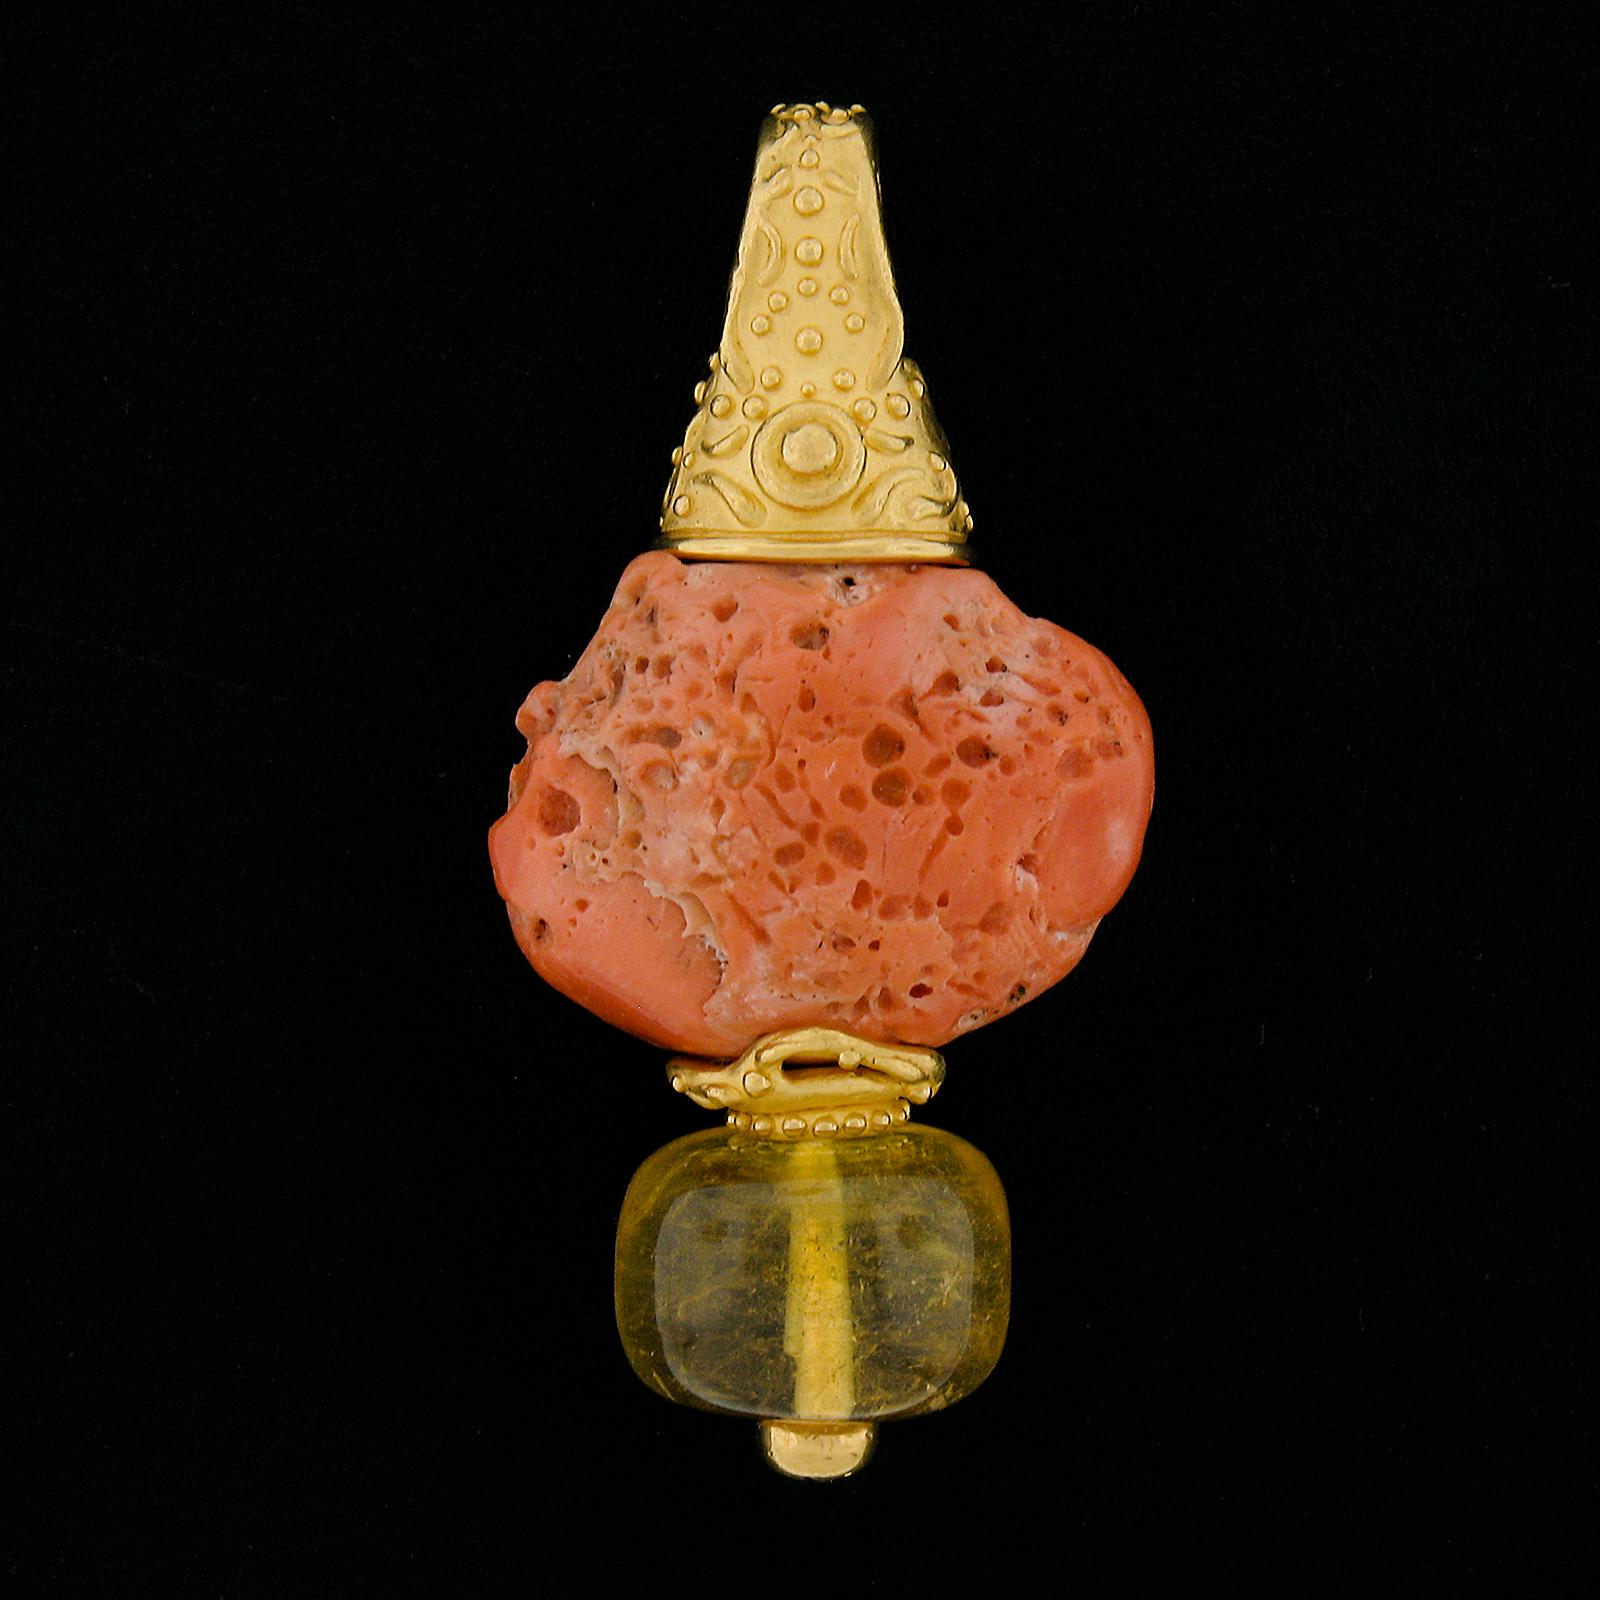 --Stone(s):--
(1) Natural Genuine Coral - Salmon Pink Color - 19.2x28.1mm (approx.)
(1) Natural Genuine Citrine - Rondelle Shape - Yellow Color - 16.7mm each (approx.)

Material: Solid 22k Yellow Gold 
Total Weight: 34.86 Grams
Overall Height: 58mm